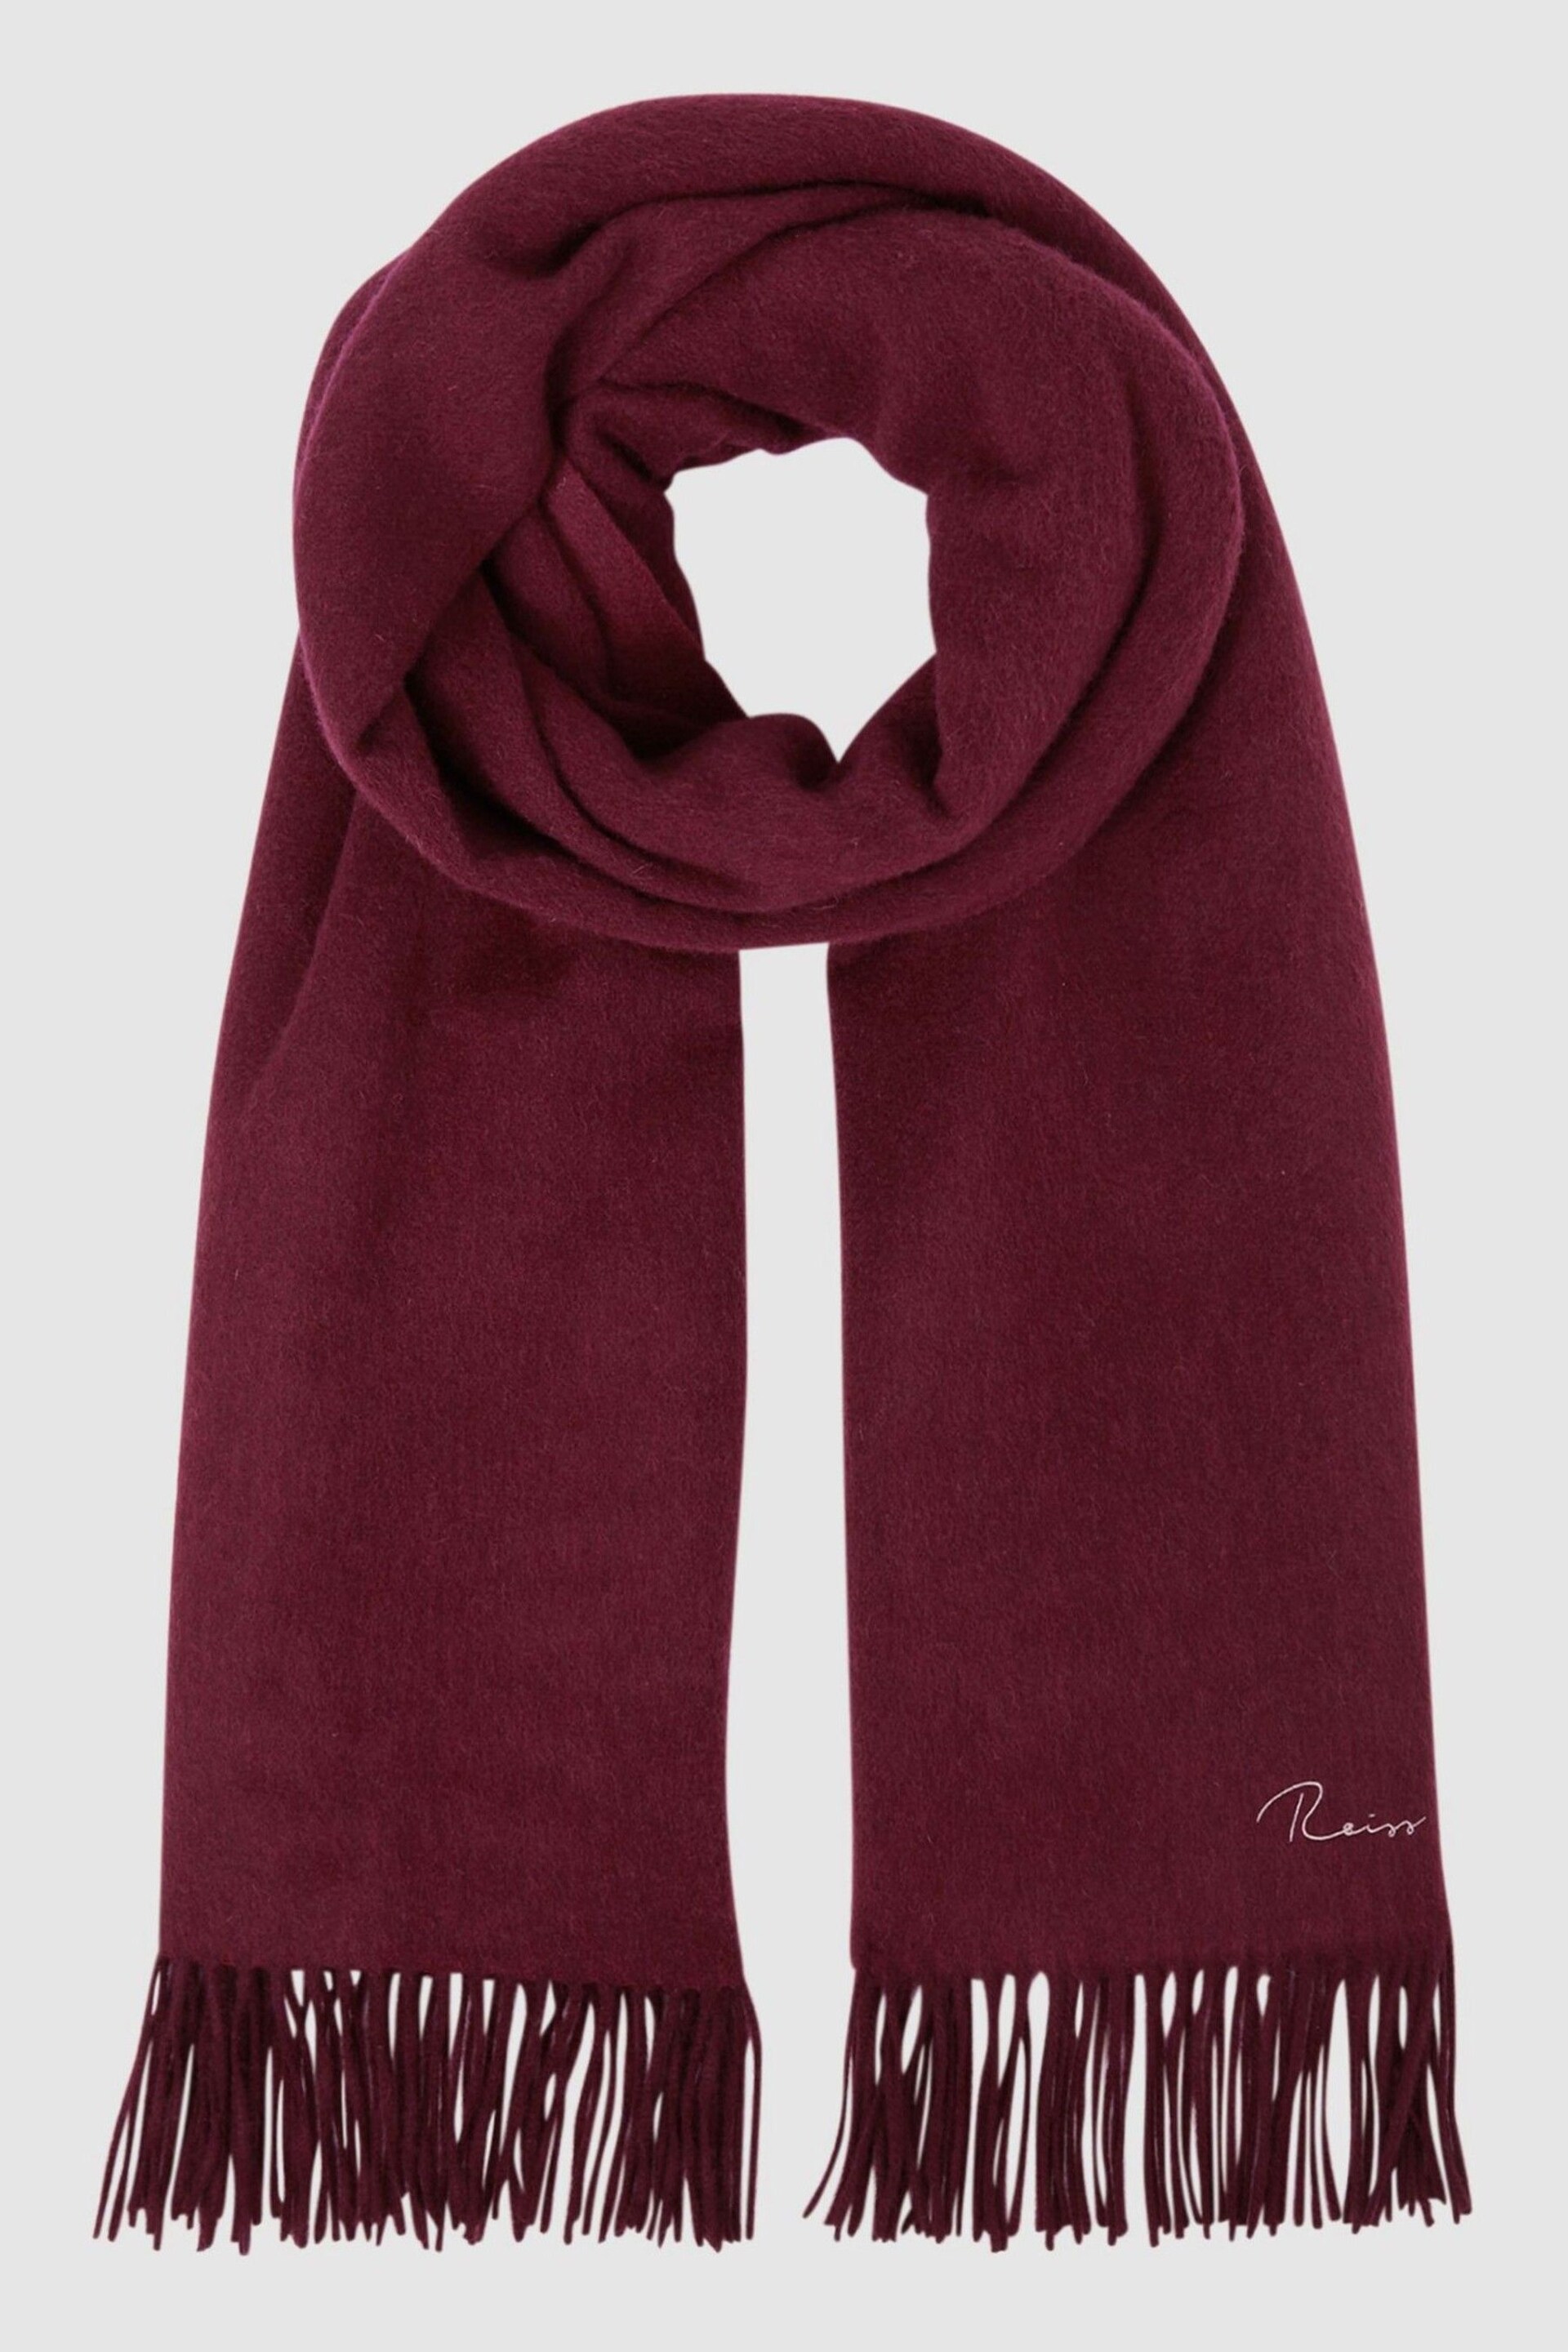 Reiss Bordeaux Picton Wool-Cashmere Scarf - Image 4 of 5